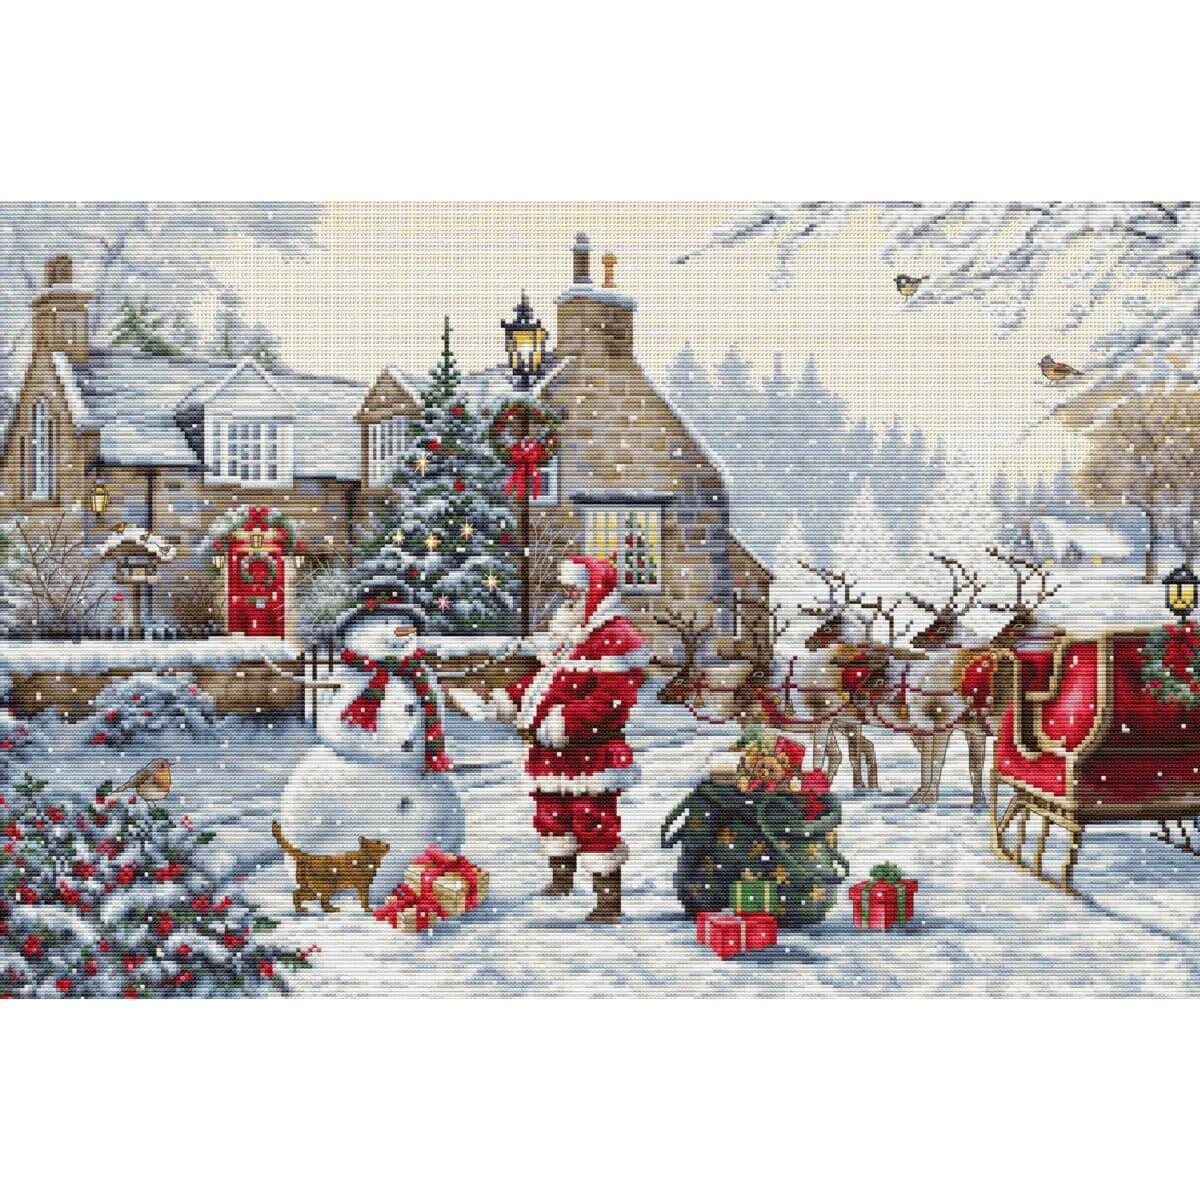 A festive winter scene with Santa Claus, a snowman with a...